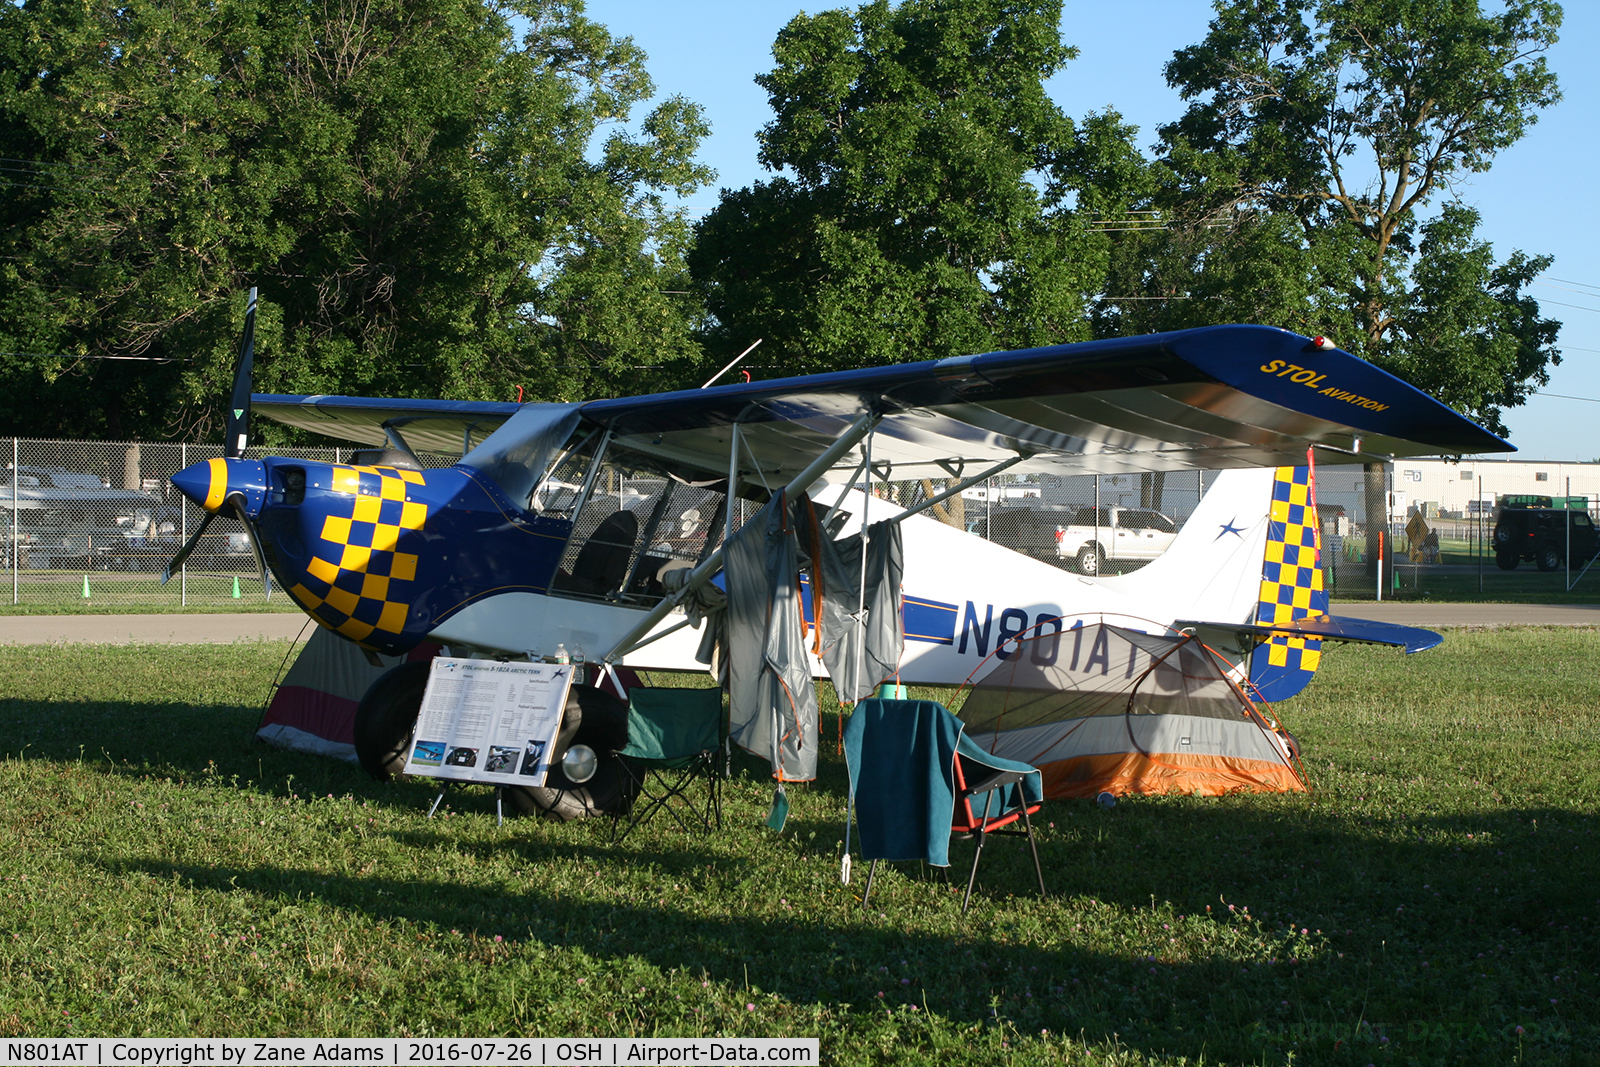 N801AT, 2006 Interstate Aircraft Co Inc S-1B2 C/N 2001, At the 2016 EAA AirVenture - Oshkosh, Wisconsin